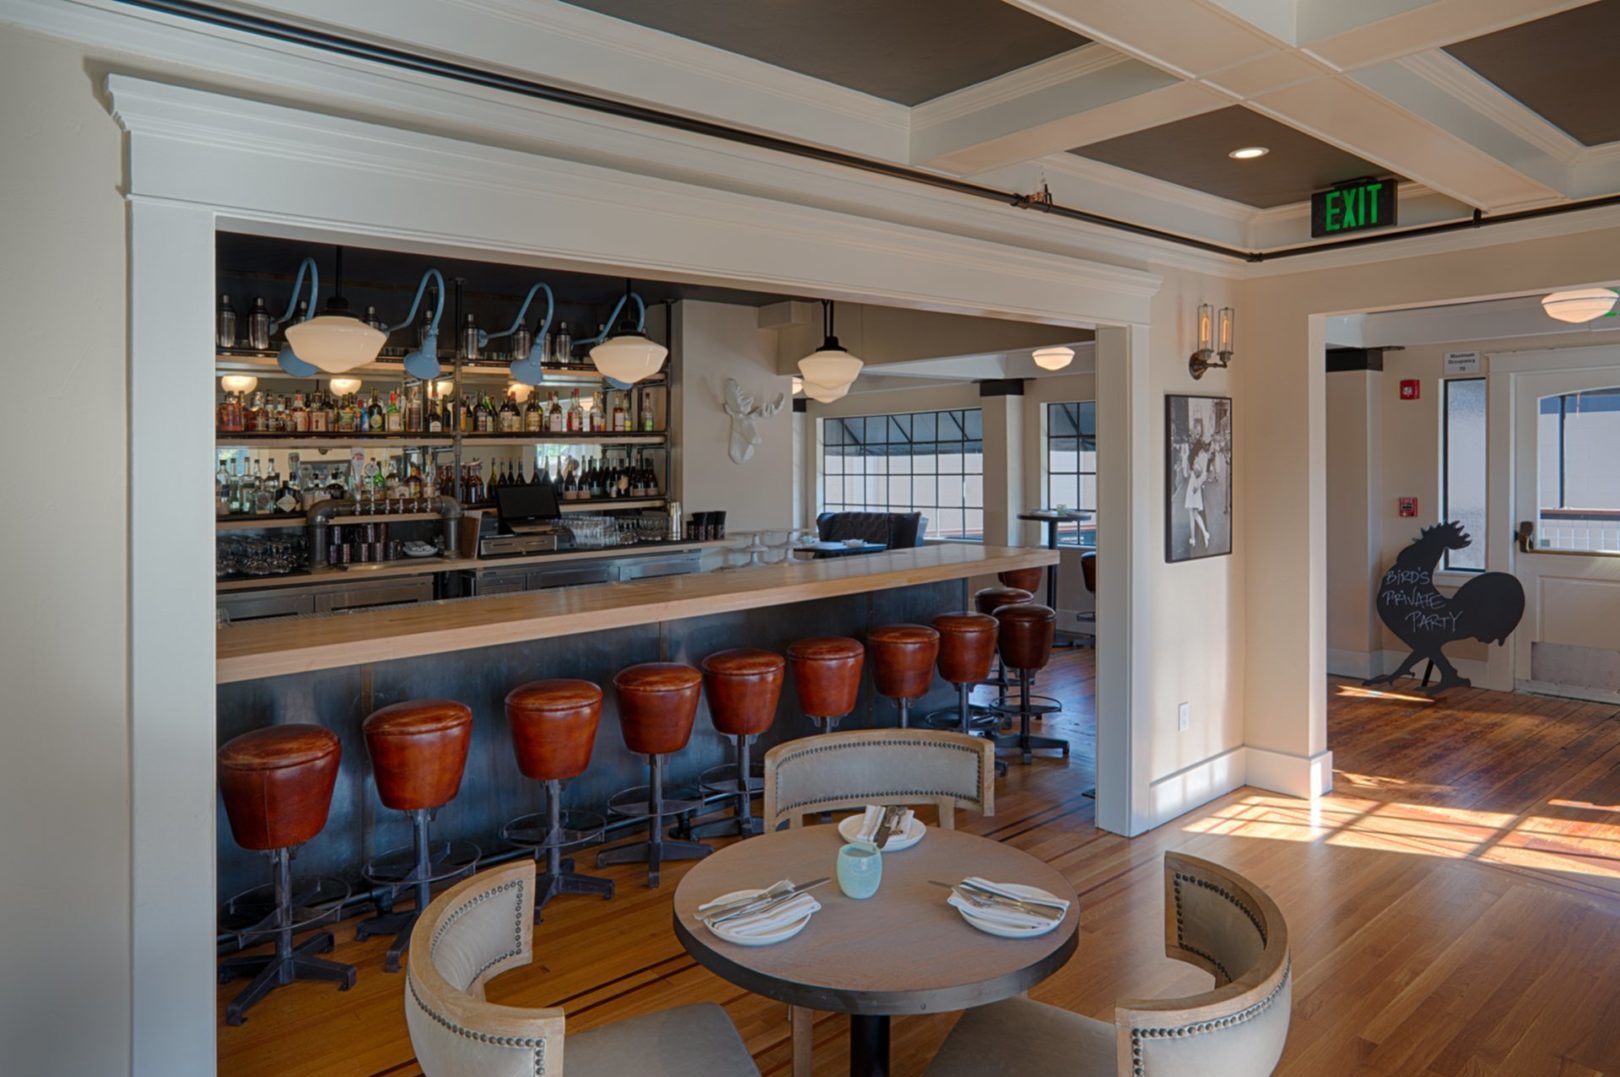 Bird & The Bottle restaurant renovation and remodel completed by FDC in Sonoma County